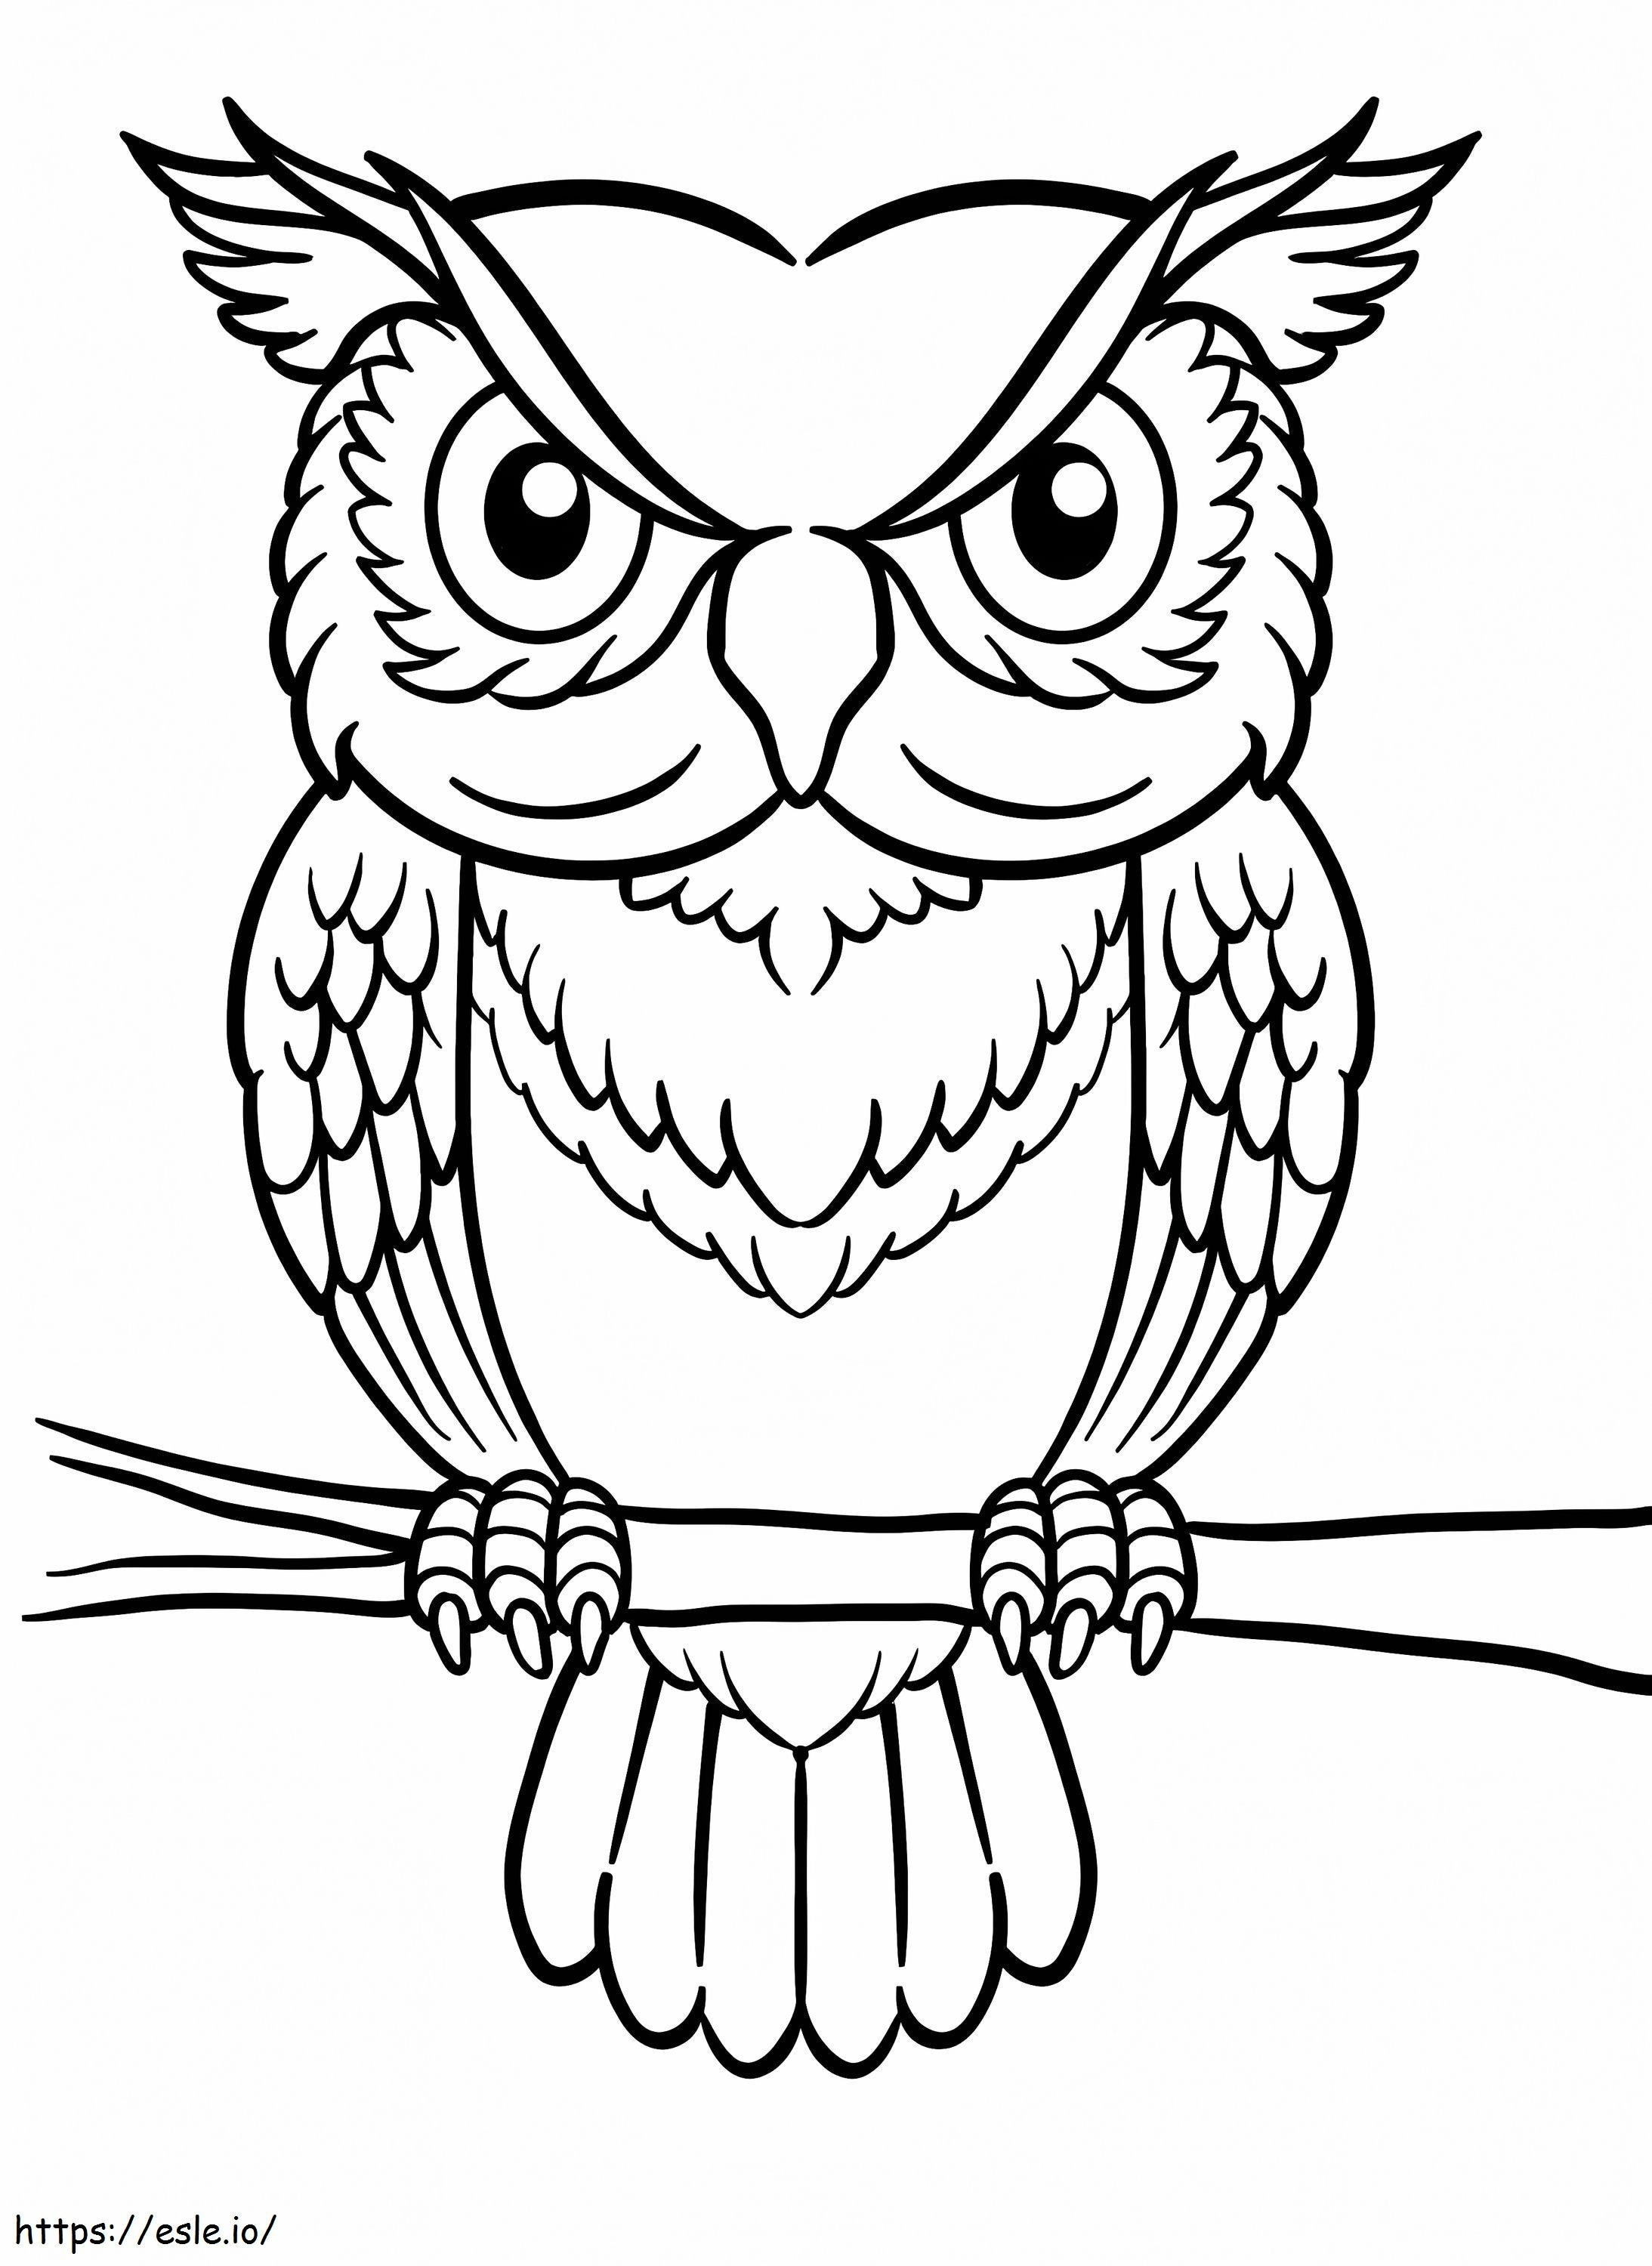 Normal Owl coloring page